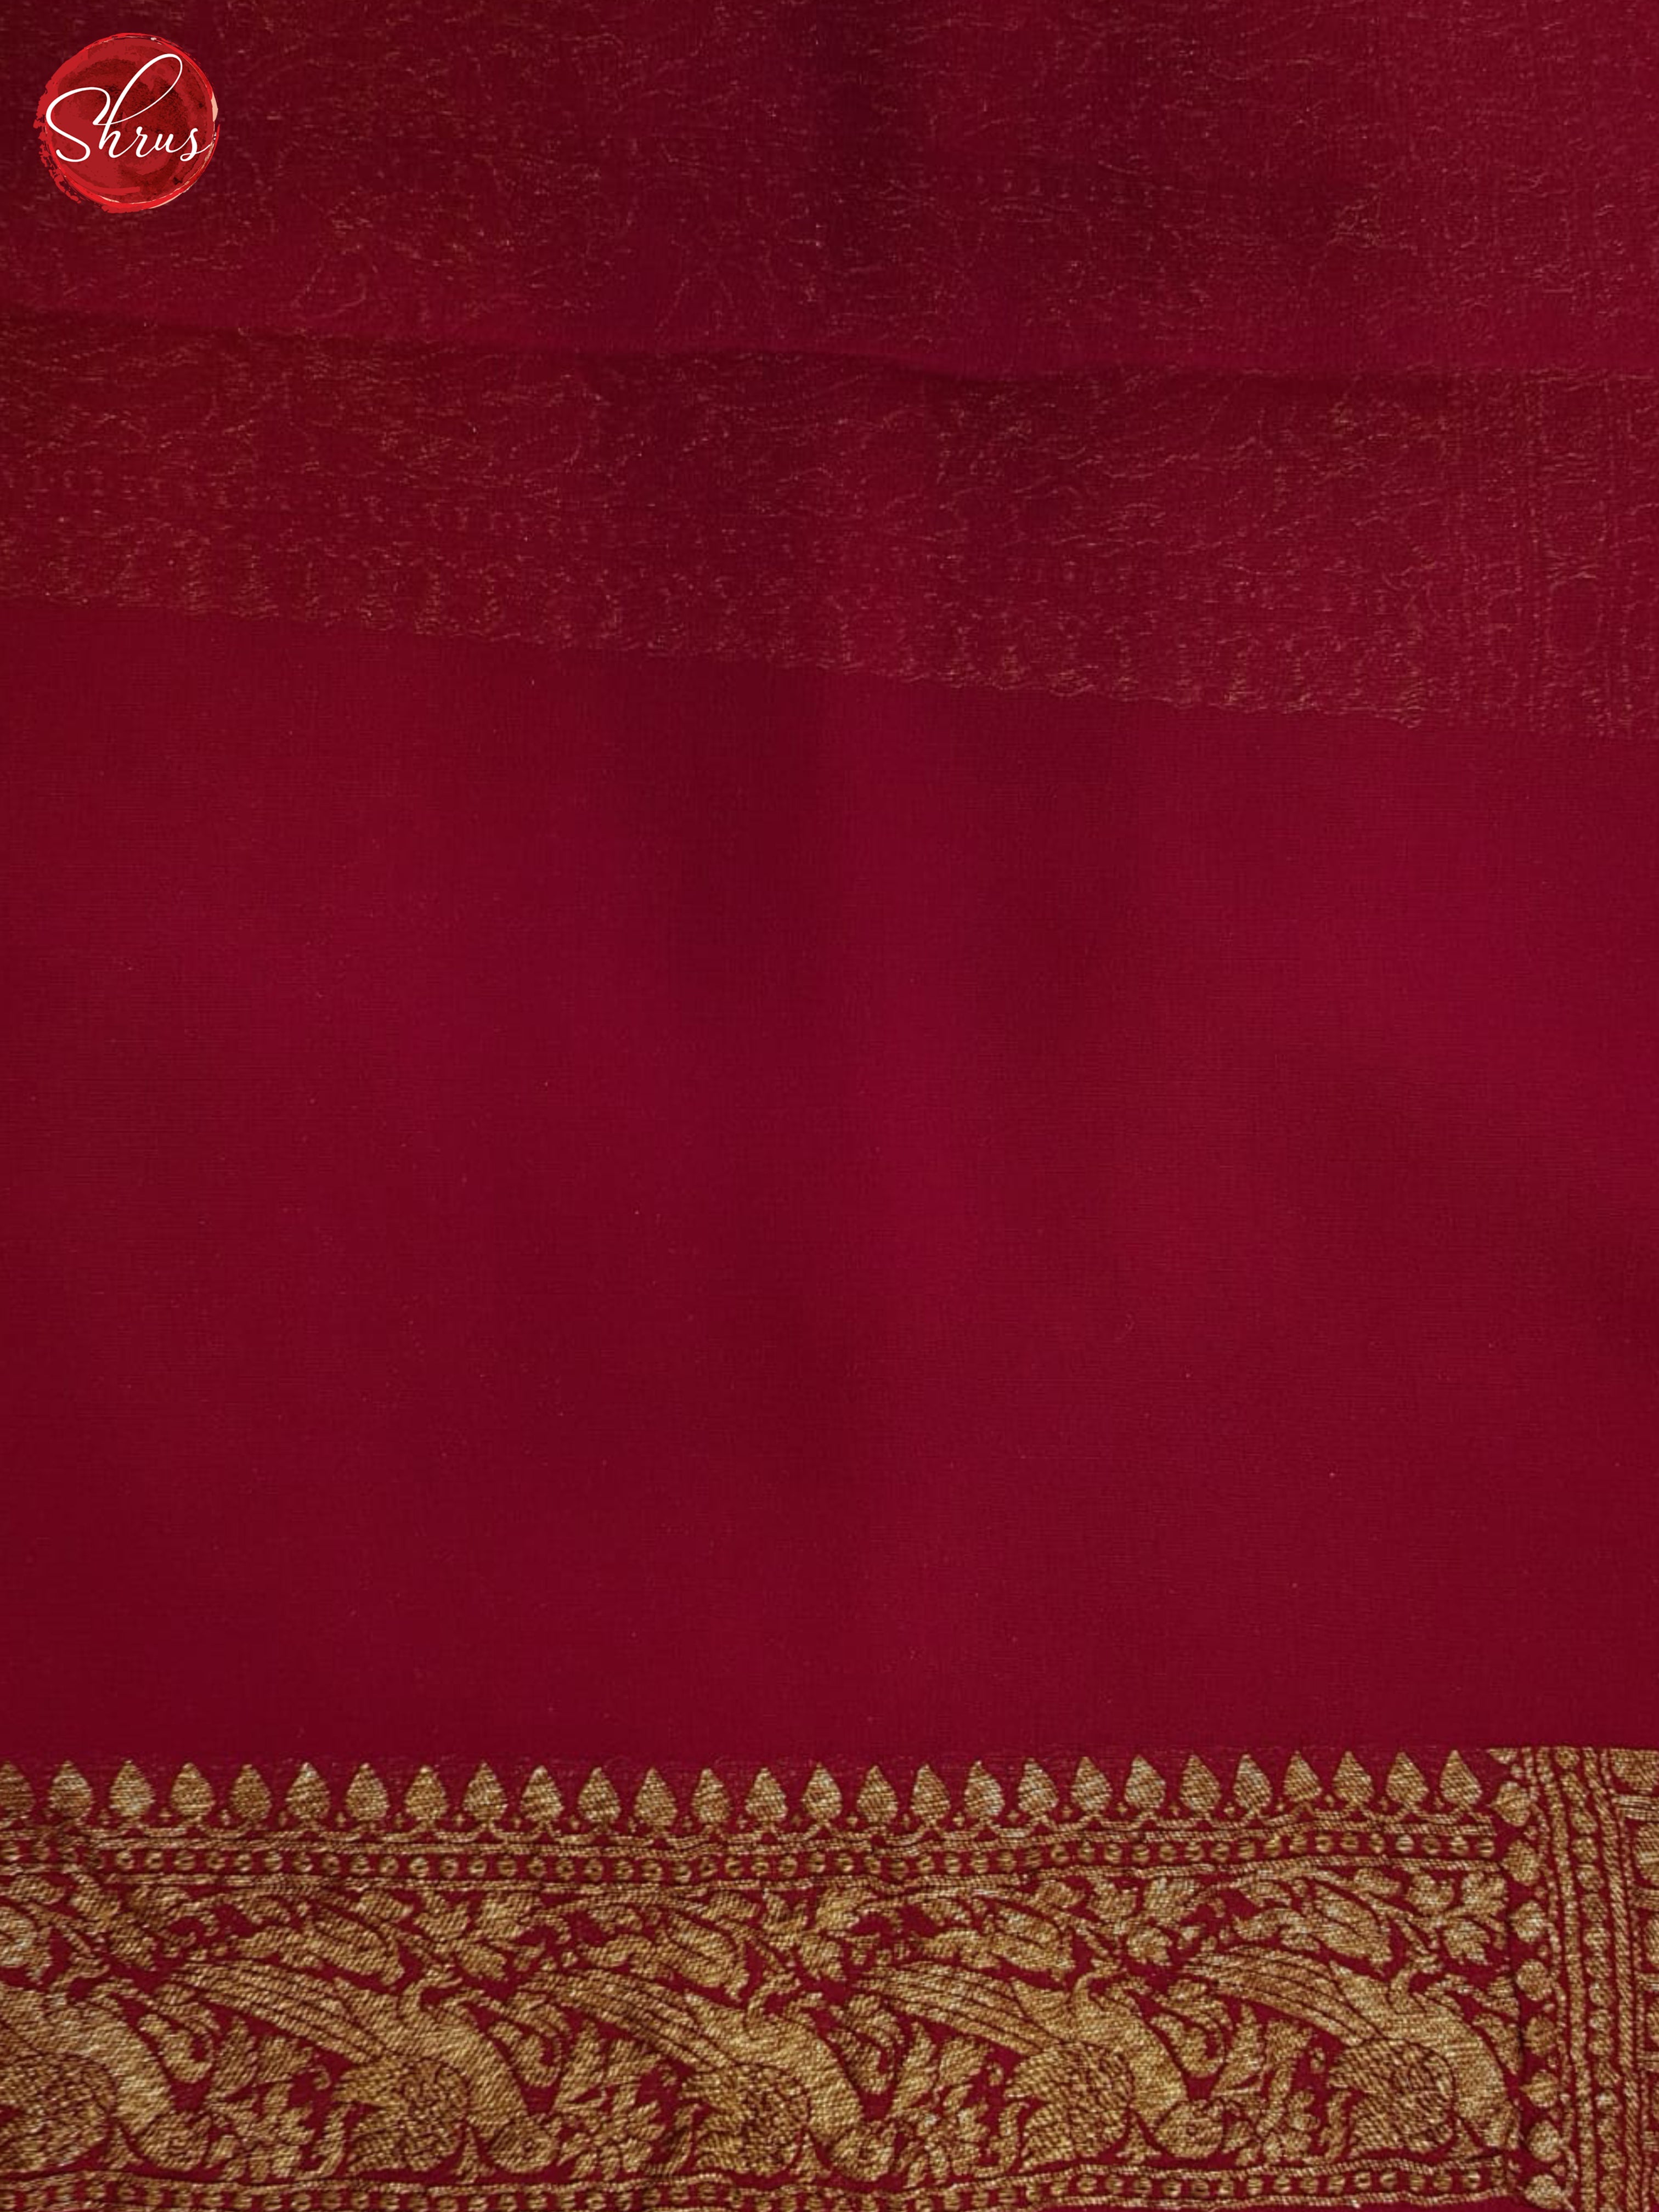 Blue And Pink- Georgette Silk Saree - Shop on ShrusEternity.com